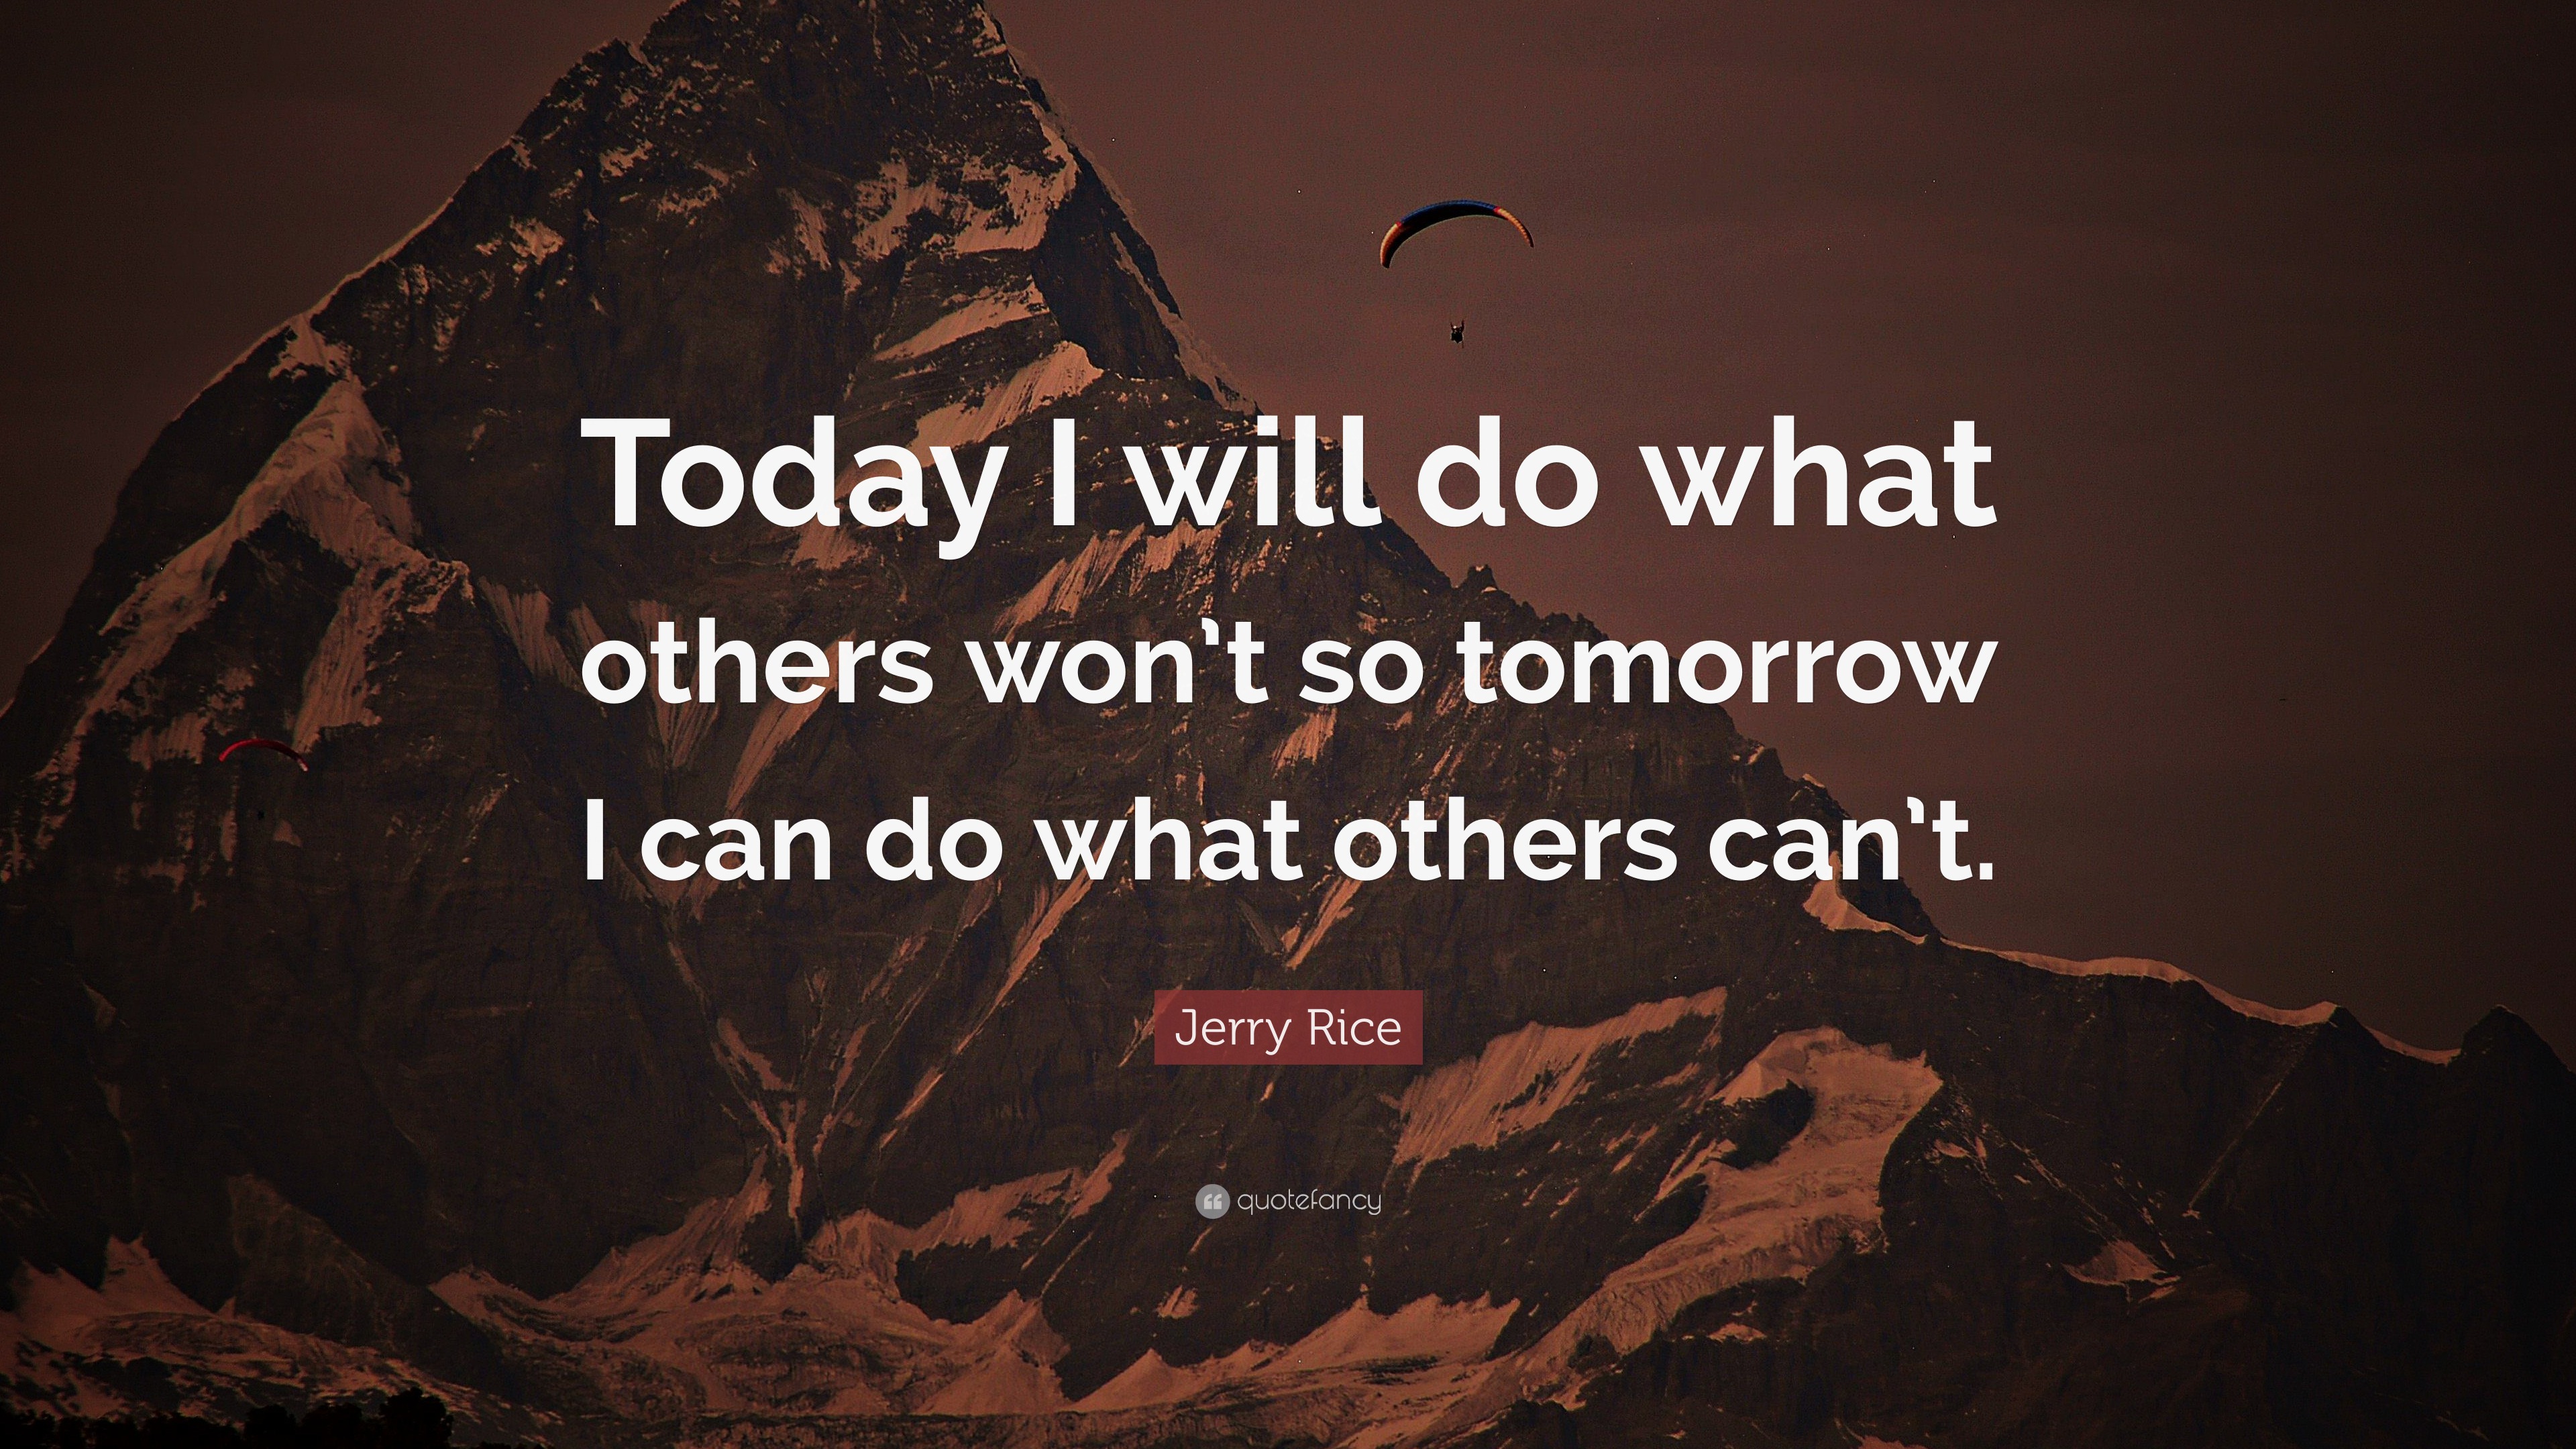 Jerry Rice Quote: “Today I will do what others won’t so tomorrow I can ...